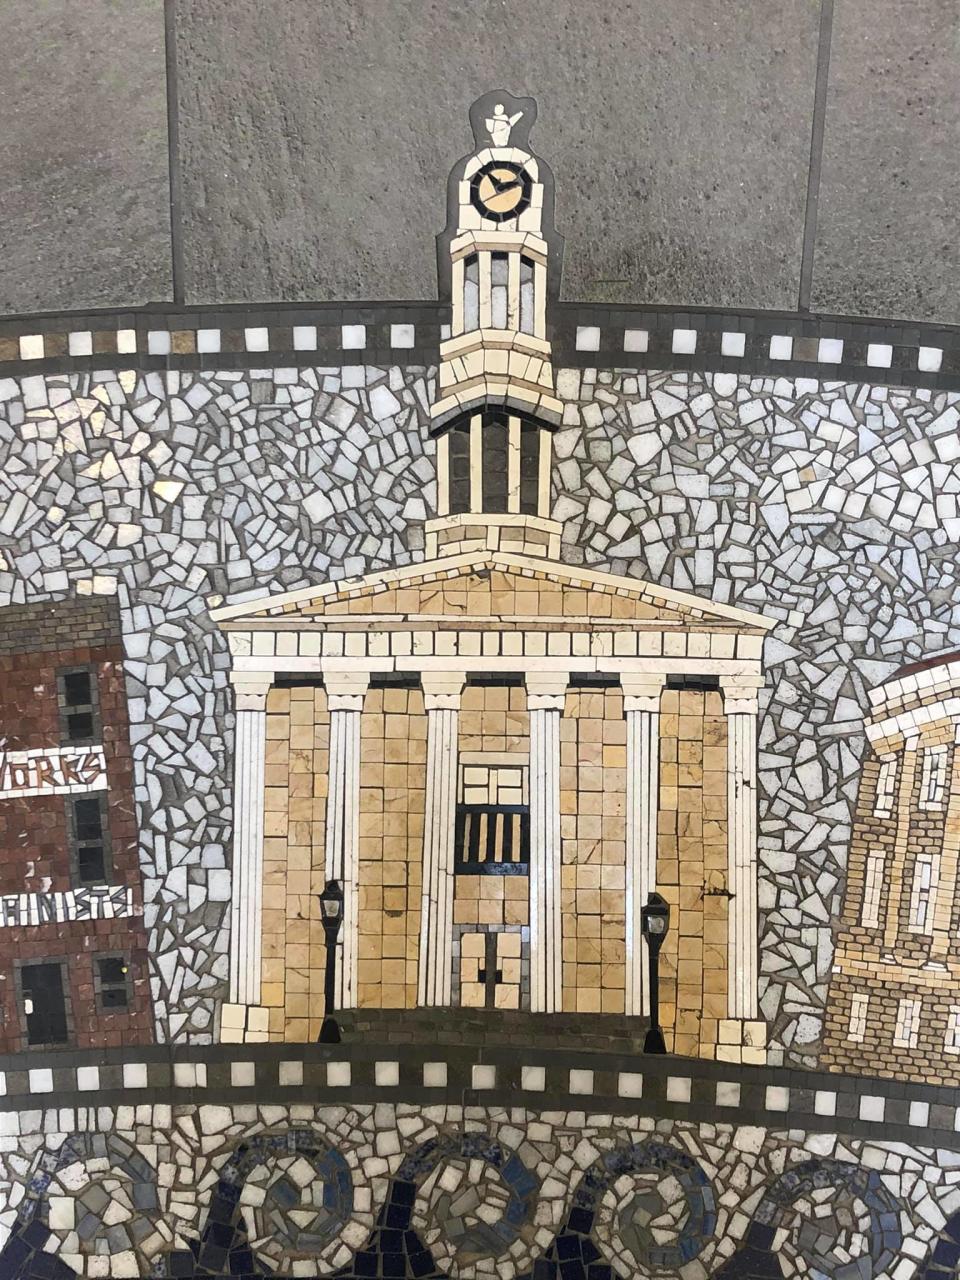 Historic Petersburg Courthouse featured in the award-winning mosaic created by Cindy Haynie of Appomattox Tile Art located in the atrium at the Petersburg Public Library.